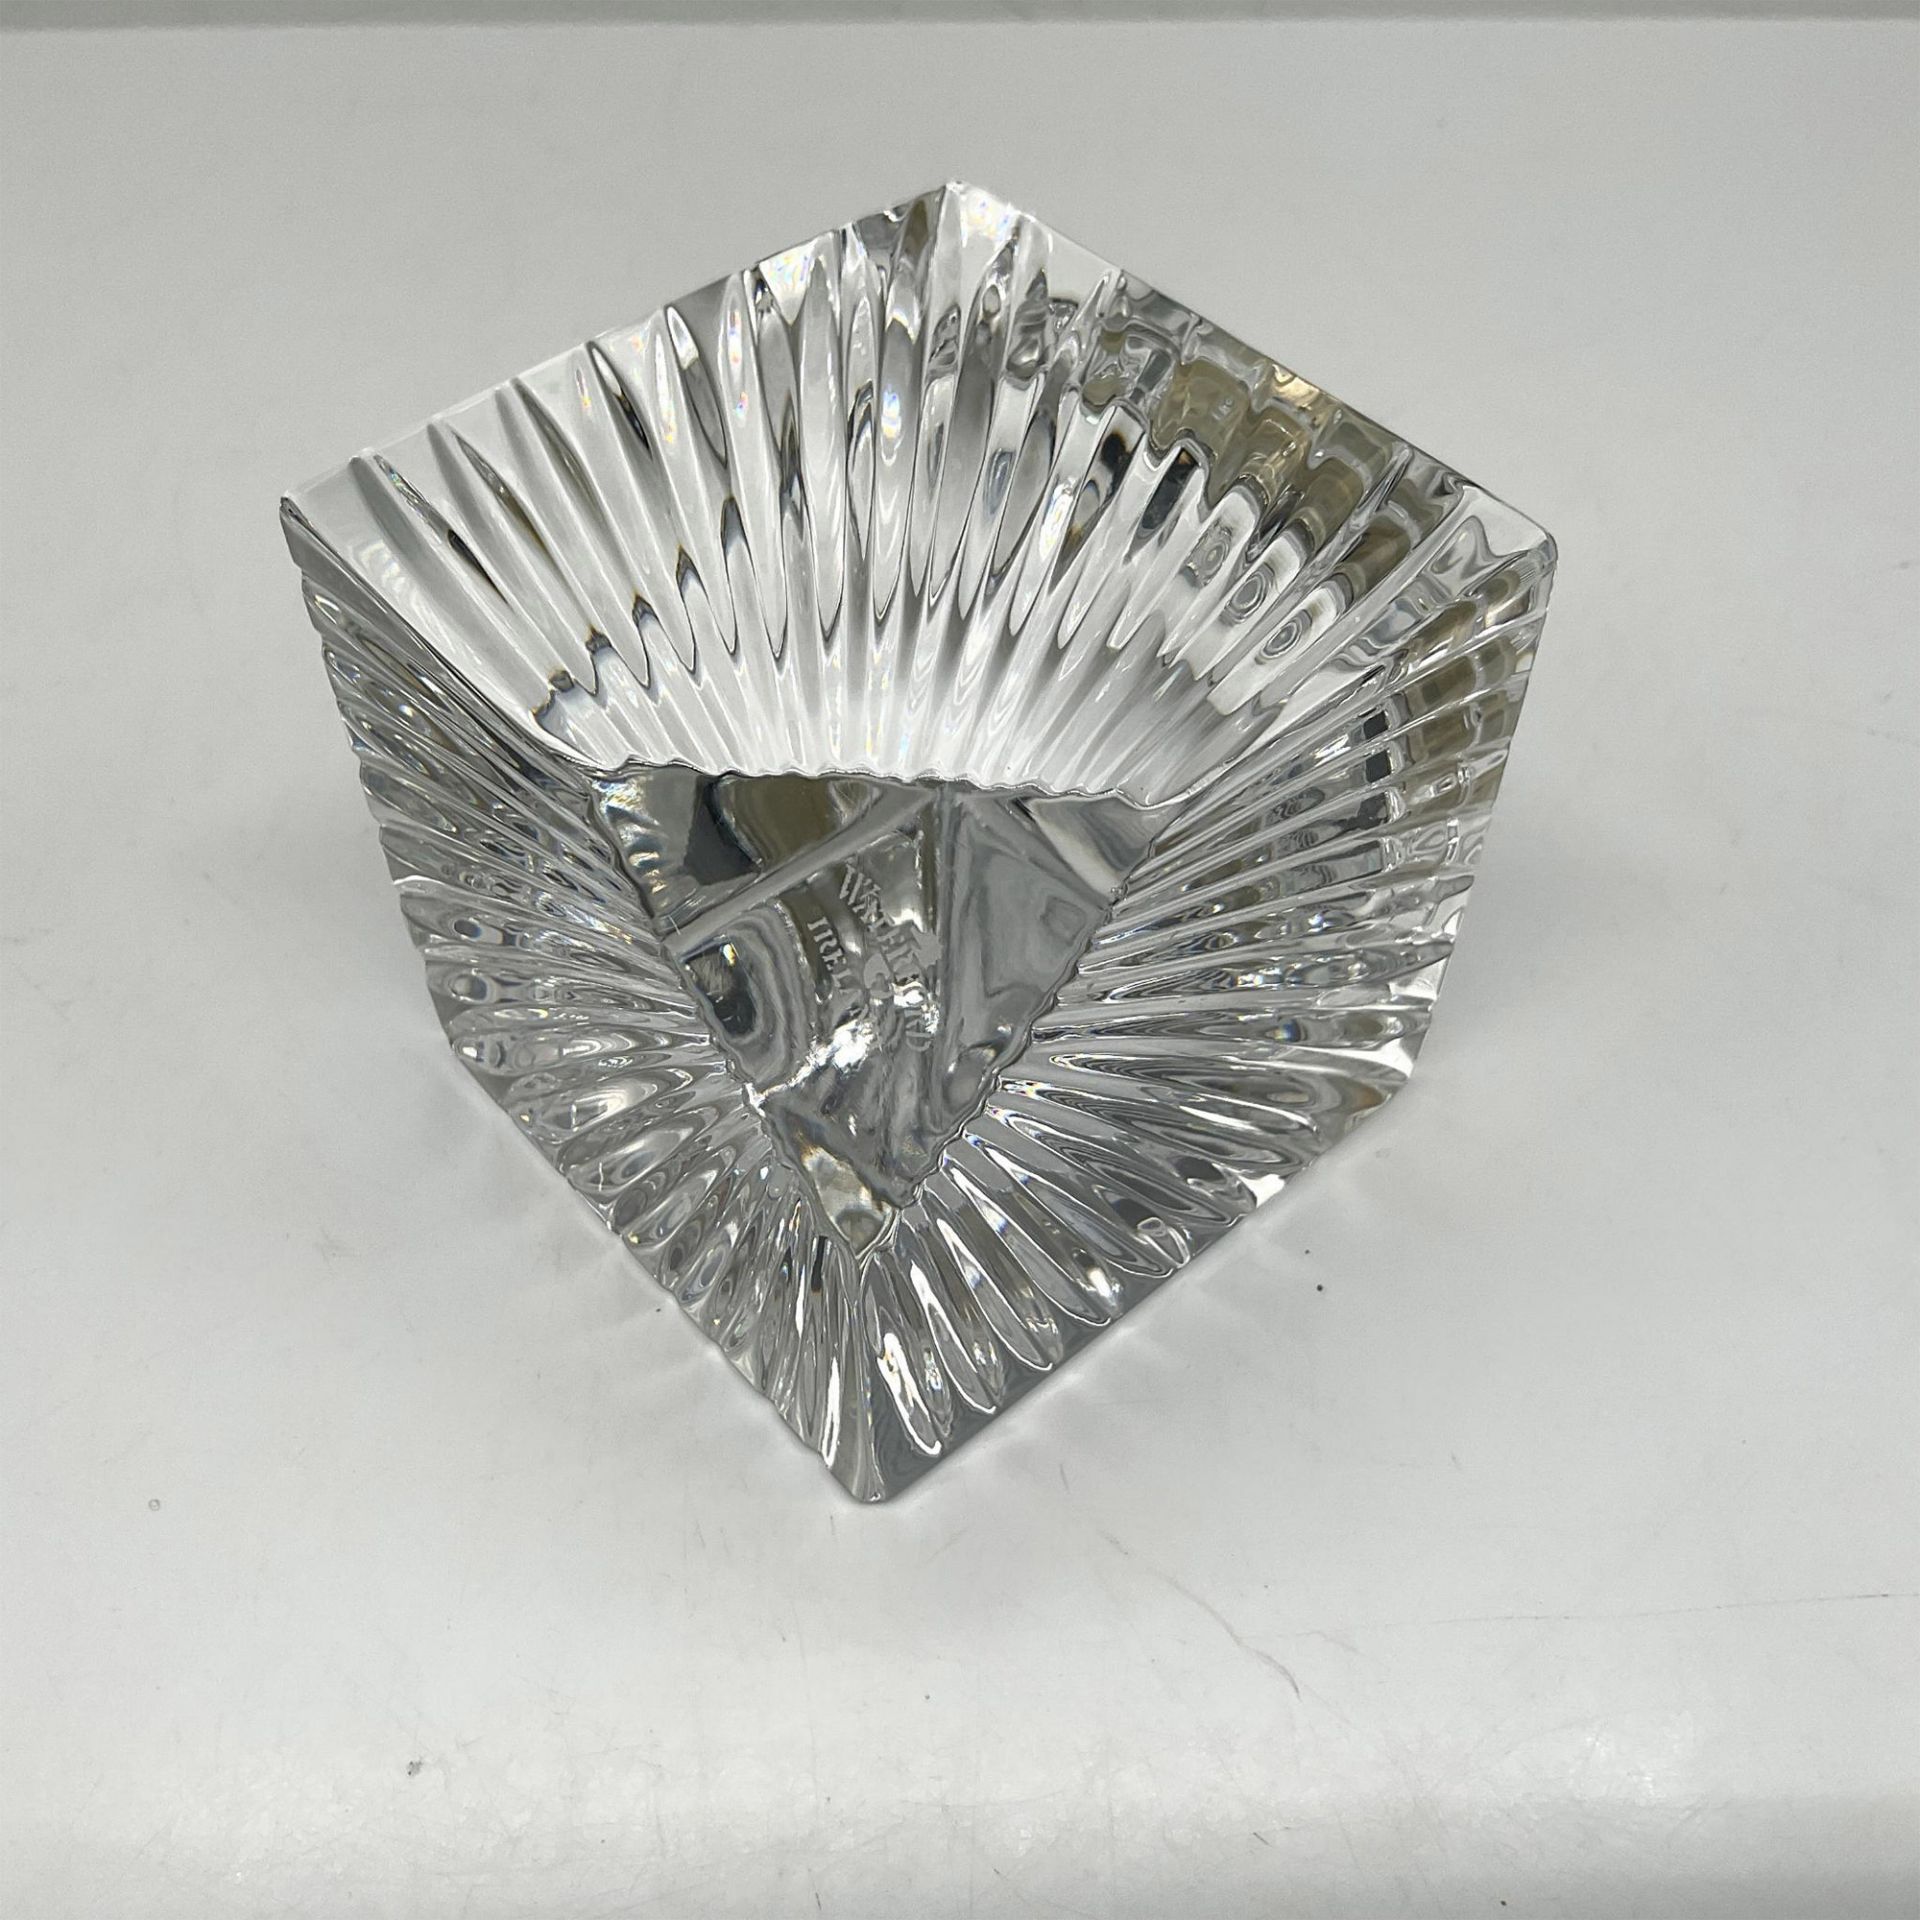 Waterford Crystal Time Pieces, Meridian Cube Desk Clock - Image 3 of 4